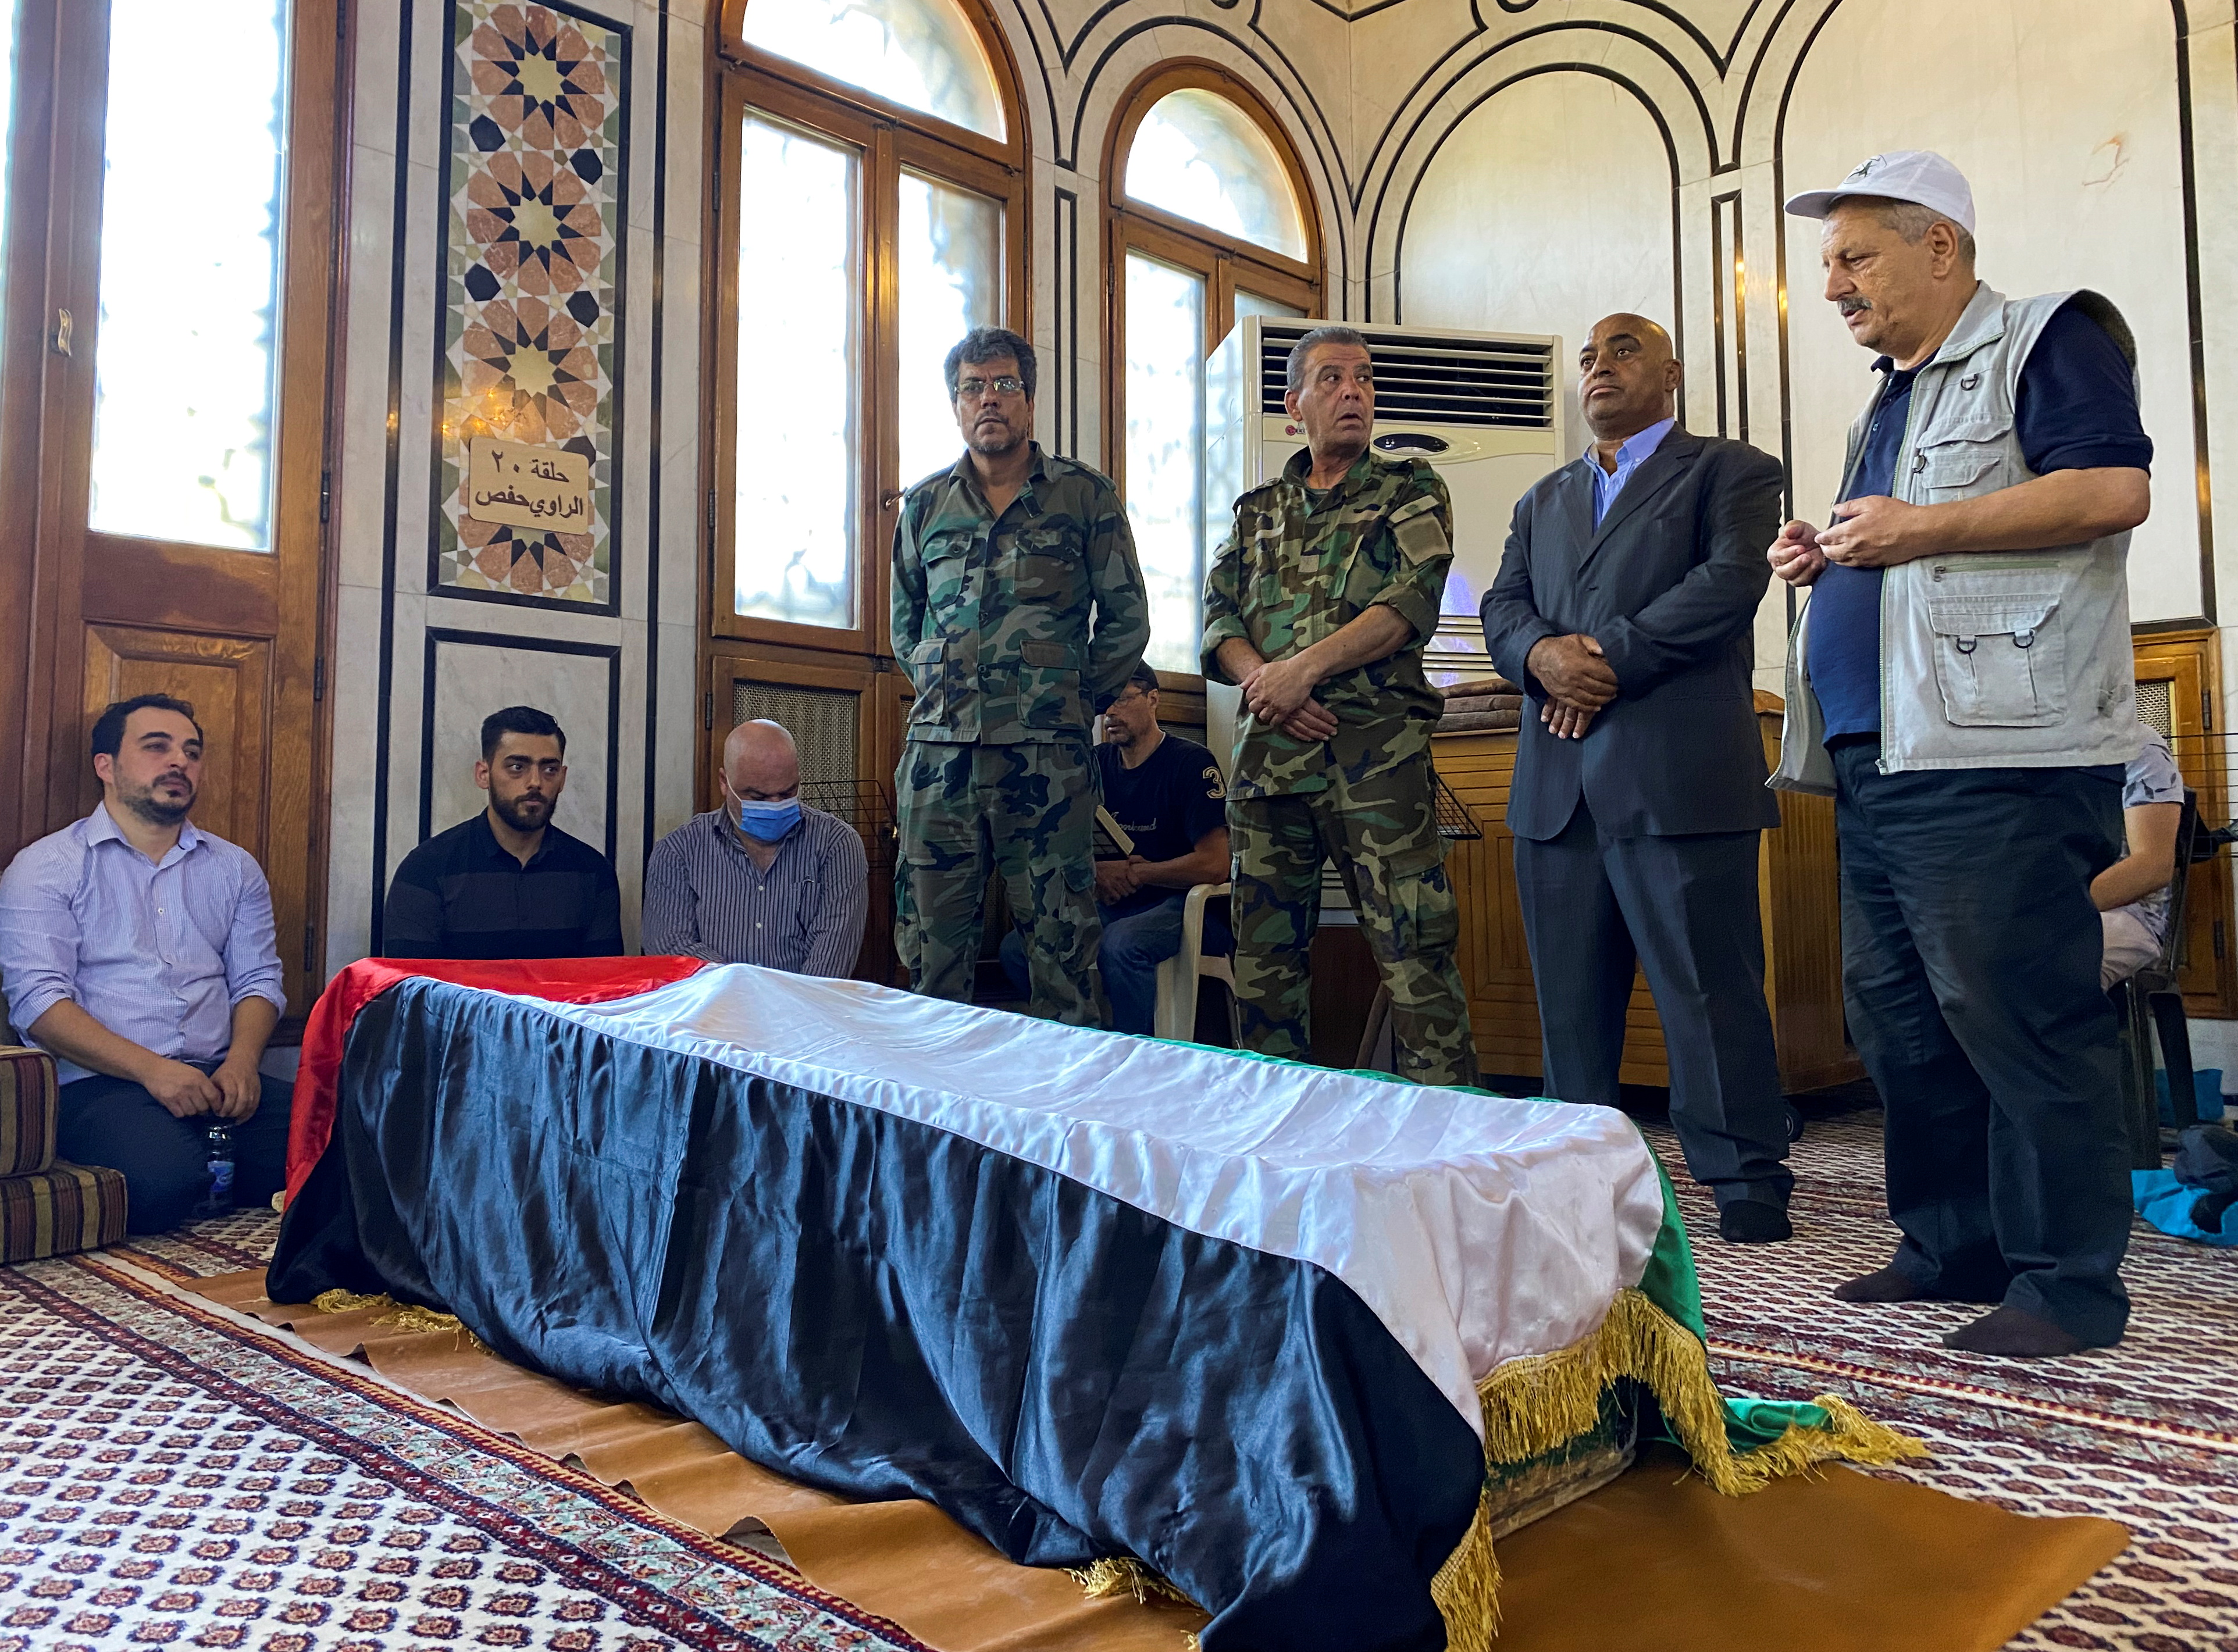 Mourners stand near the coffin of Ahmed Jibril, founder of pro-Syrian Palestinian guerrilla faction, during his funeral at a mosque in Damascus